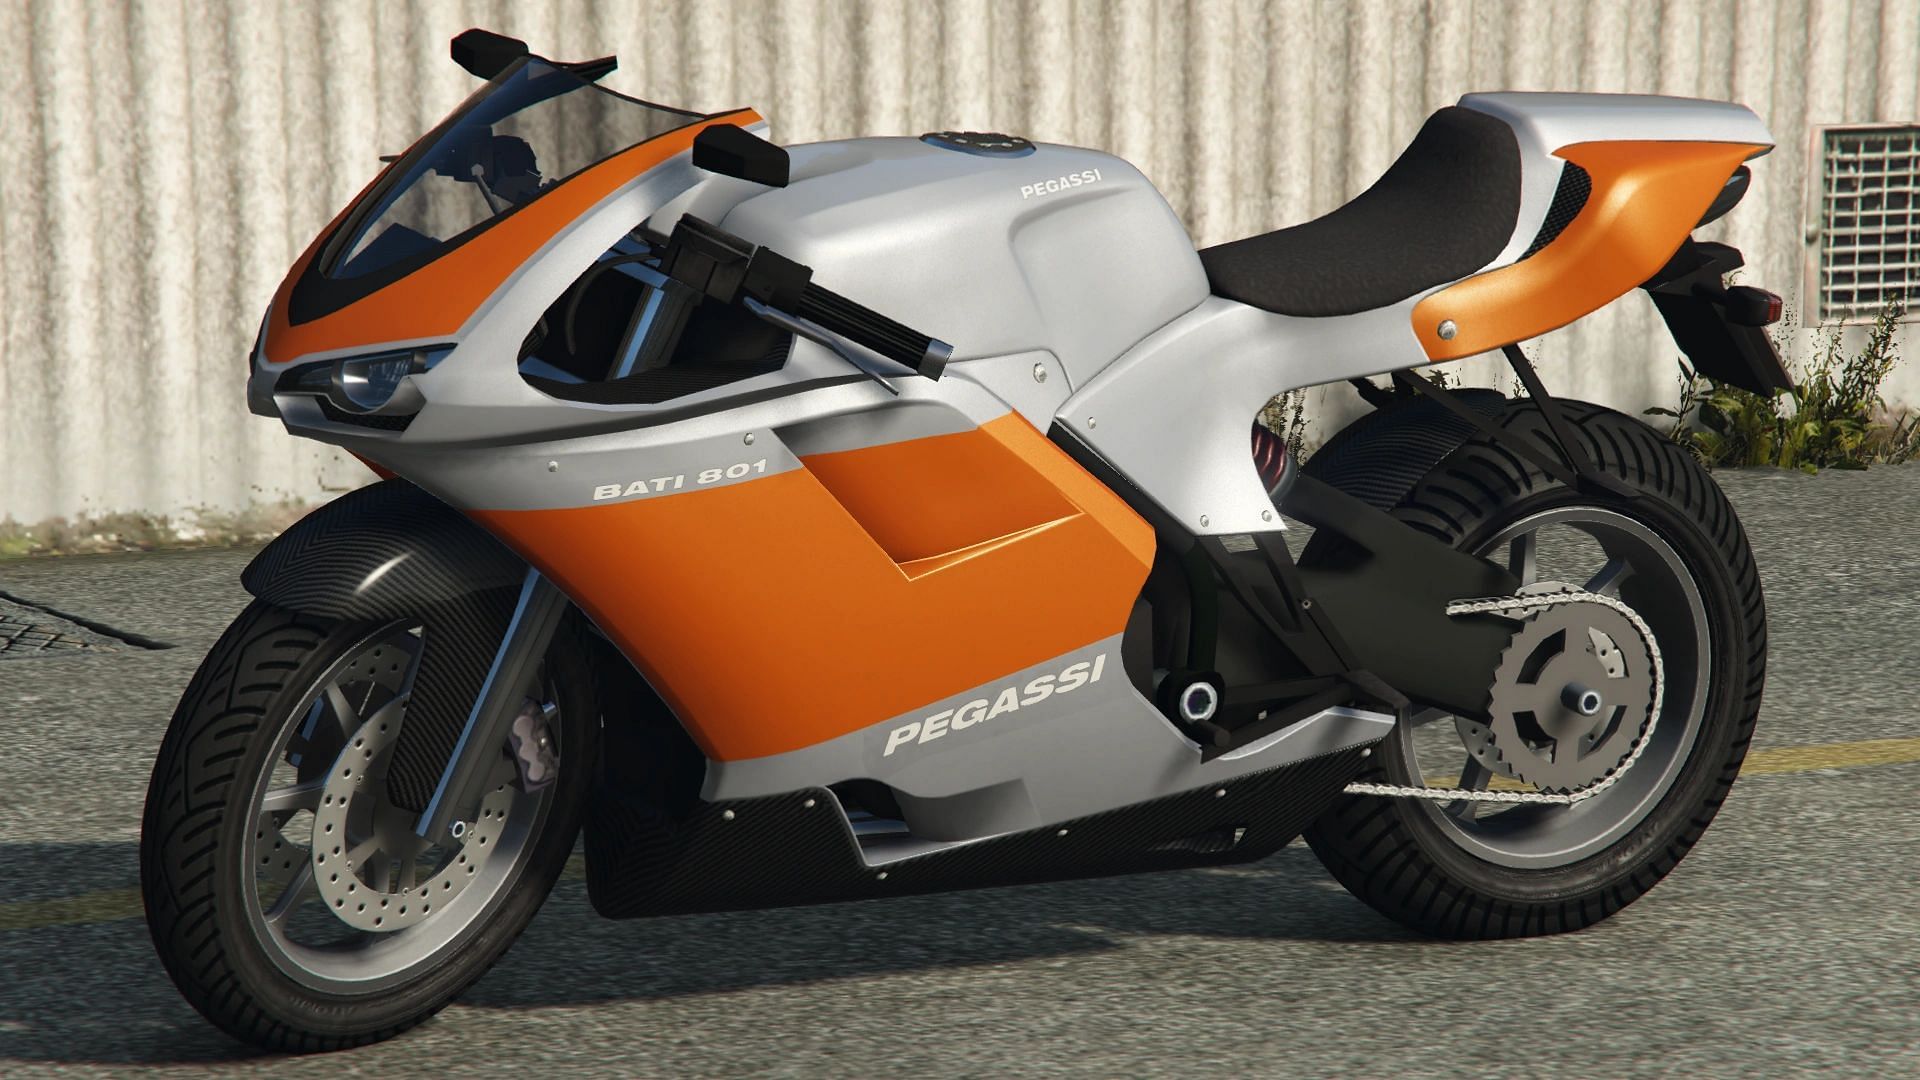 The Bati 801 is an amazing motorcycle. (Image via Rockstar Games || GTA Wiki/Switch101)